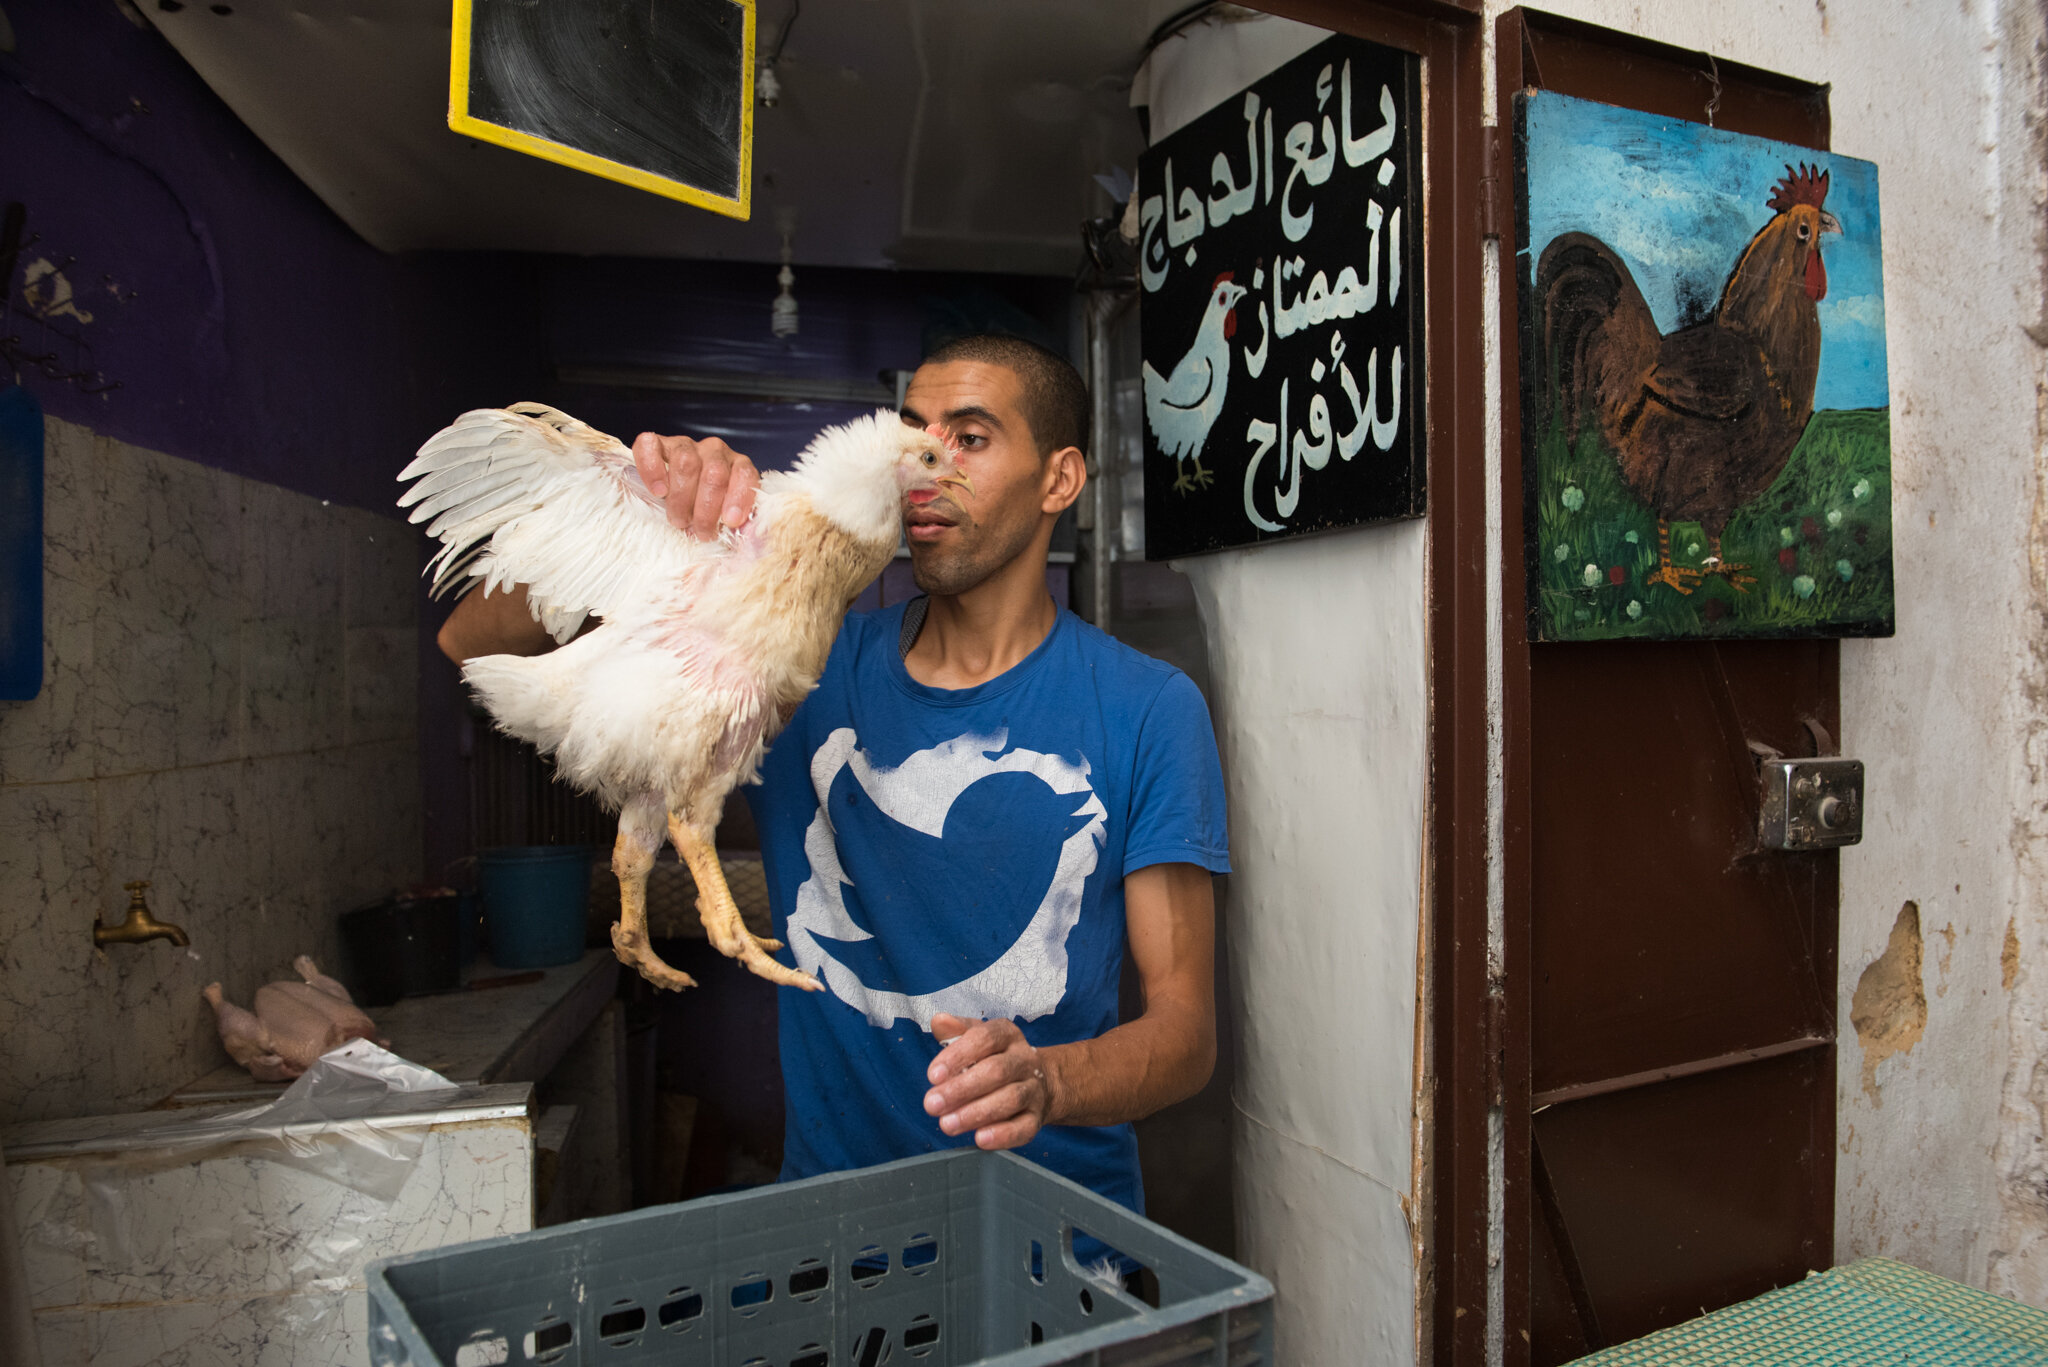    Morocco - Fes     Man selling chickens. Wearing twitter shirt. 